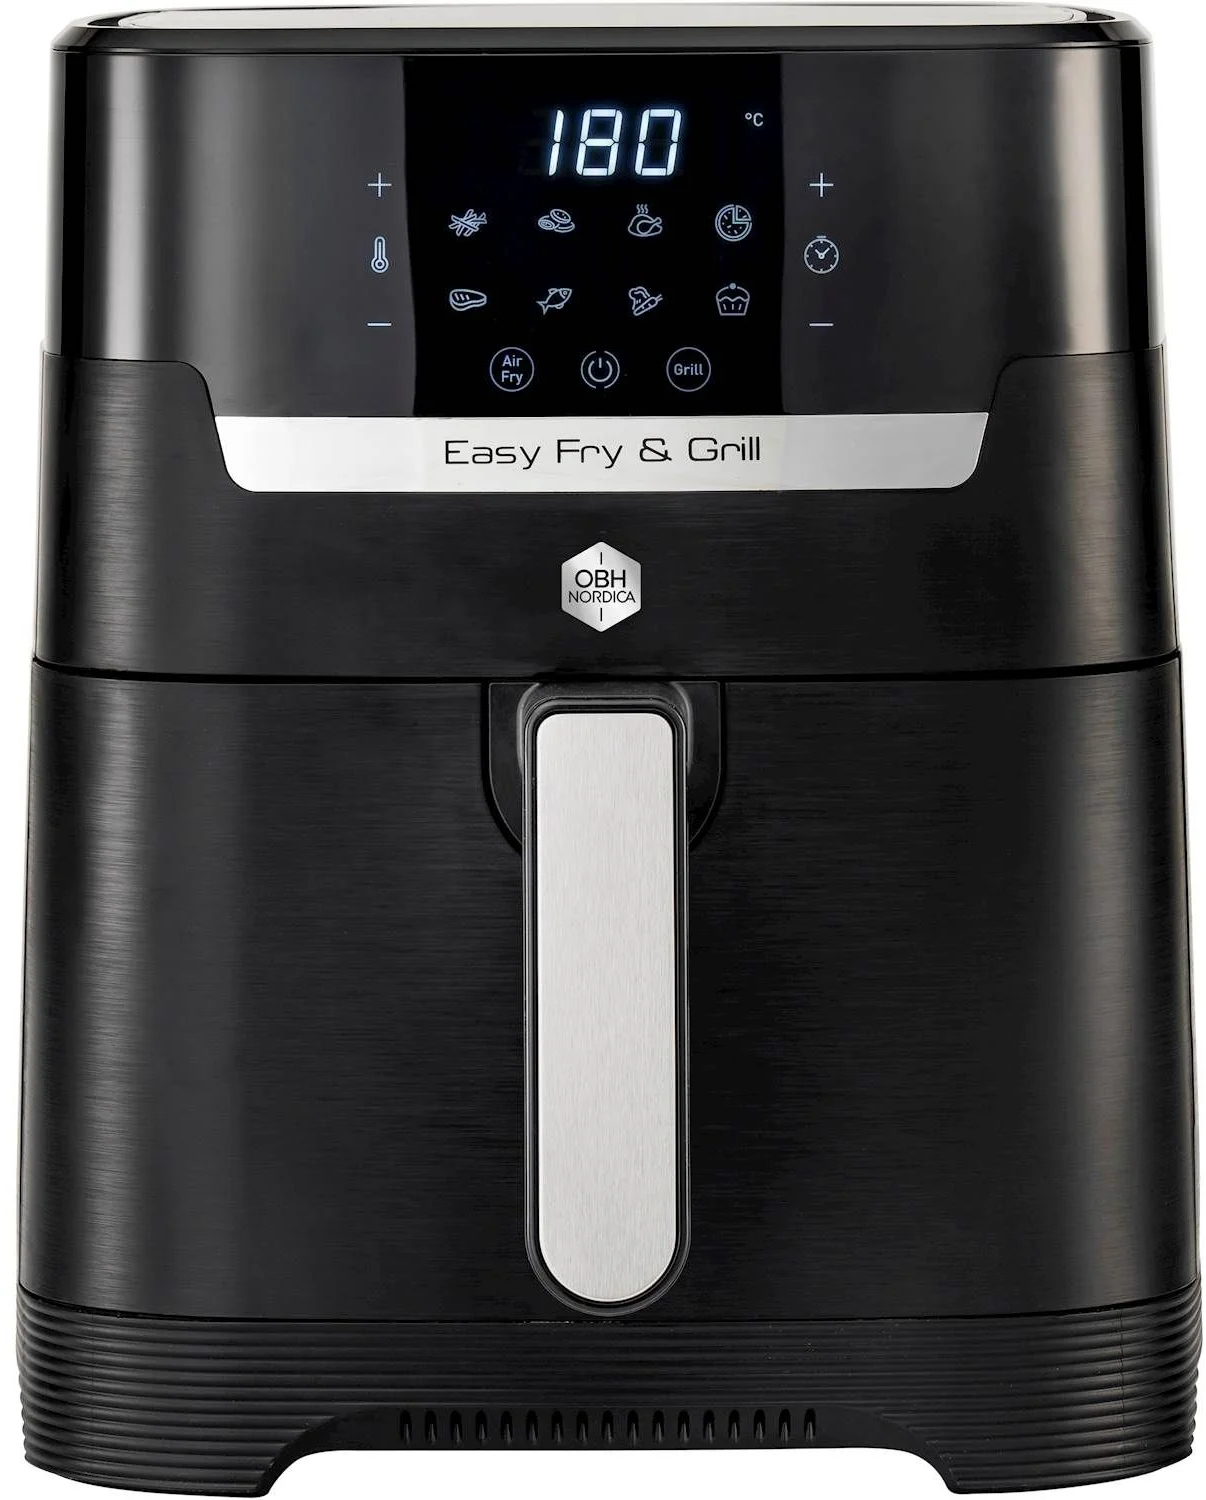 3045380022201 OBH Nordica Easy Fry & Grill 2in1 - Airfryer Husholdning,Madtilberedning,Grill-/friture 2100222010 Easy Fry & Grill 2in1